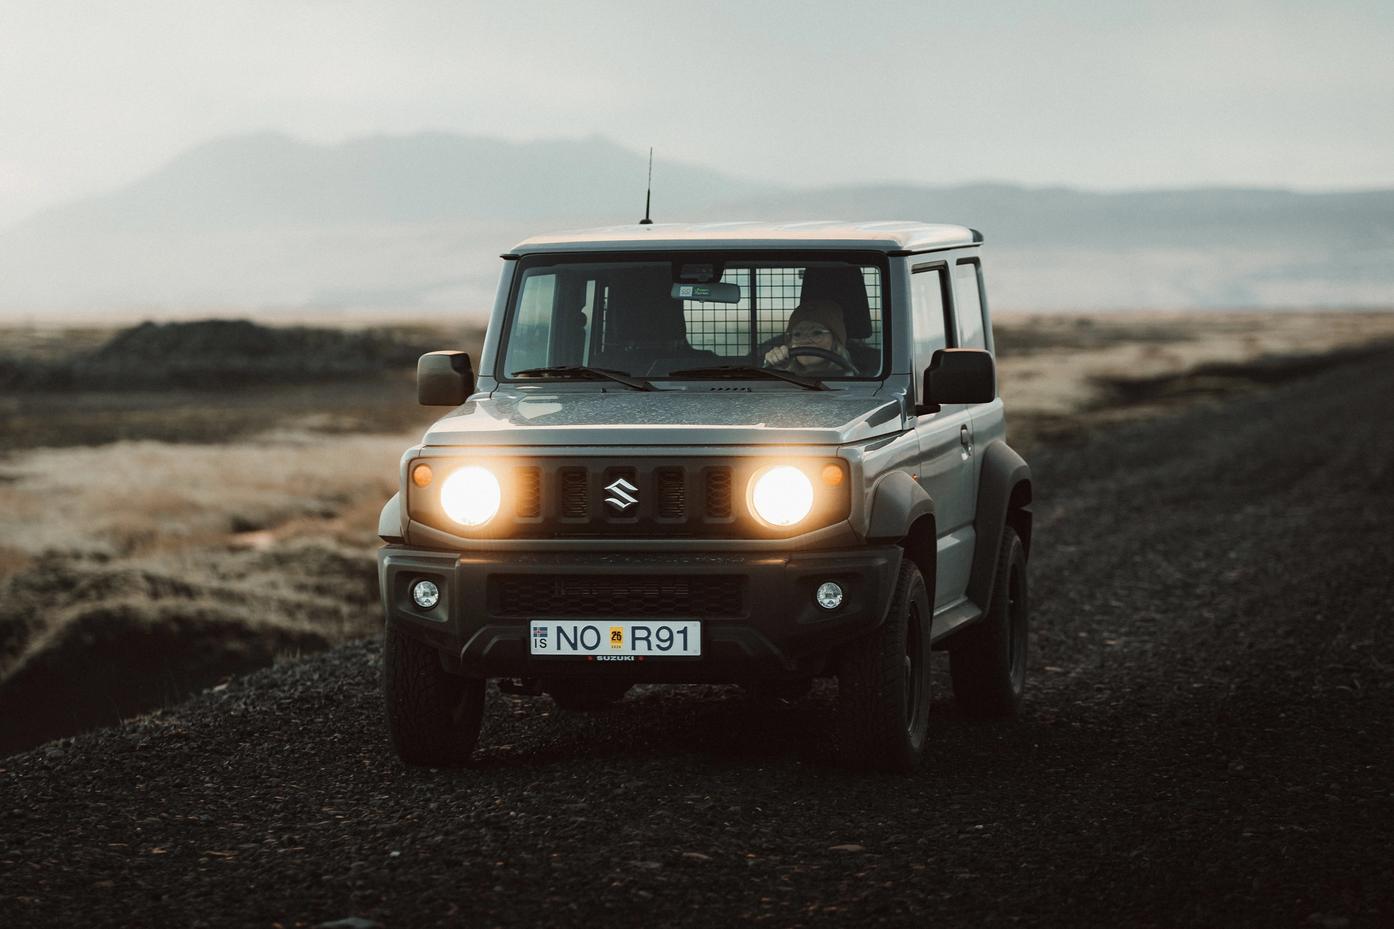 A 4x4 rental car traveling on a scenic road, part of the Golden Circle route in Iceland.